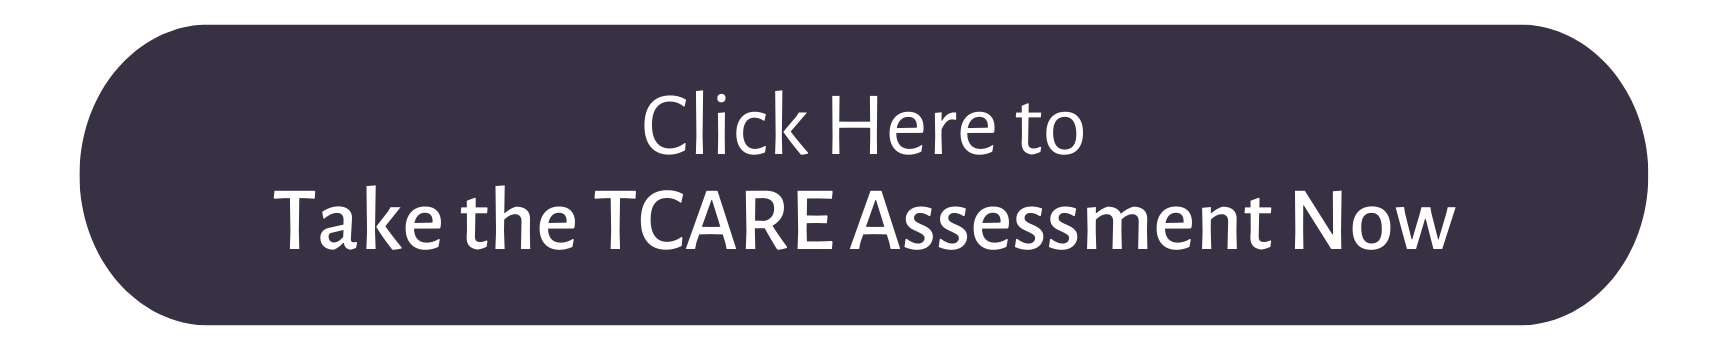 Take the TCARE Assessment Now 1